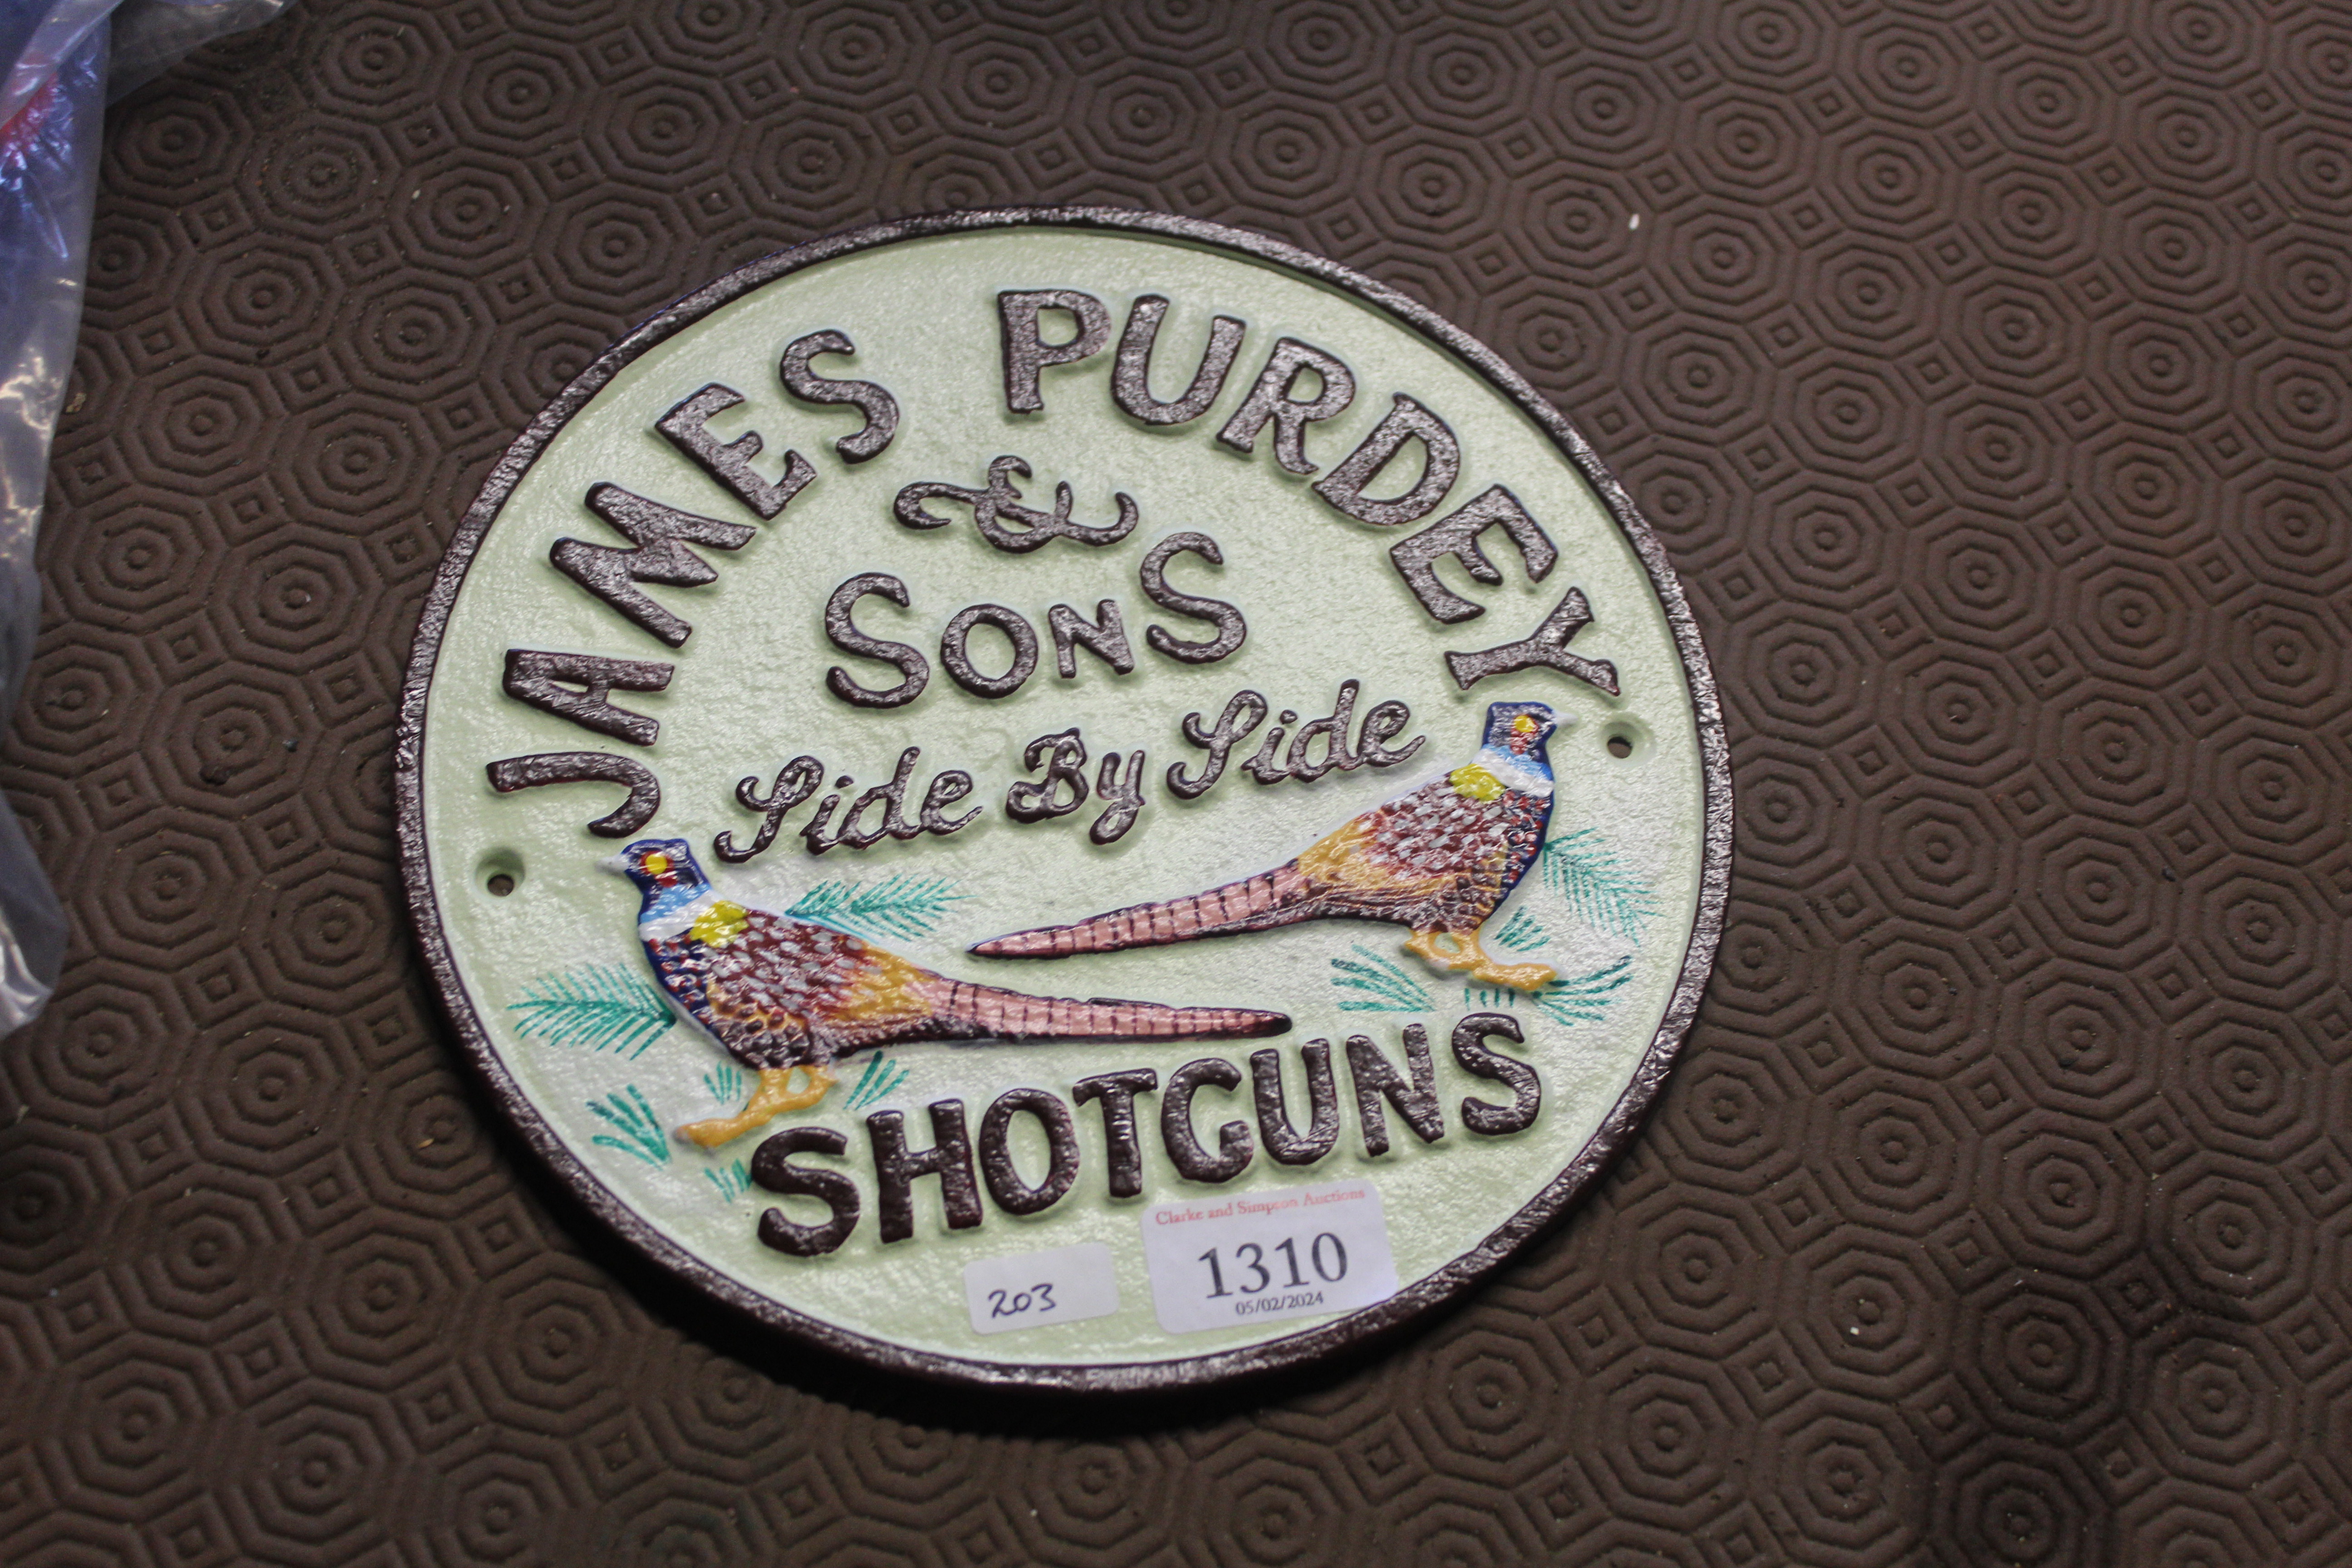 A circular cast iron sign "James Purdy & Sons" (20